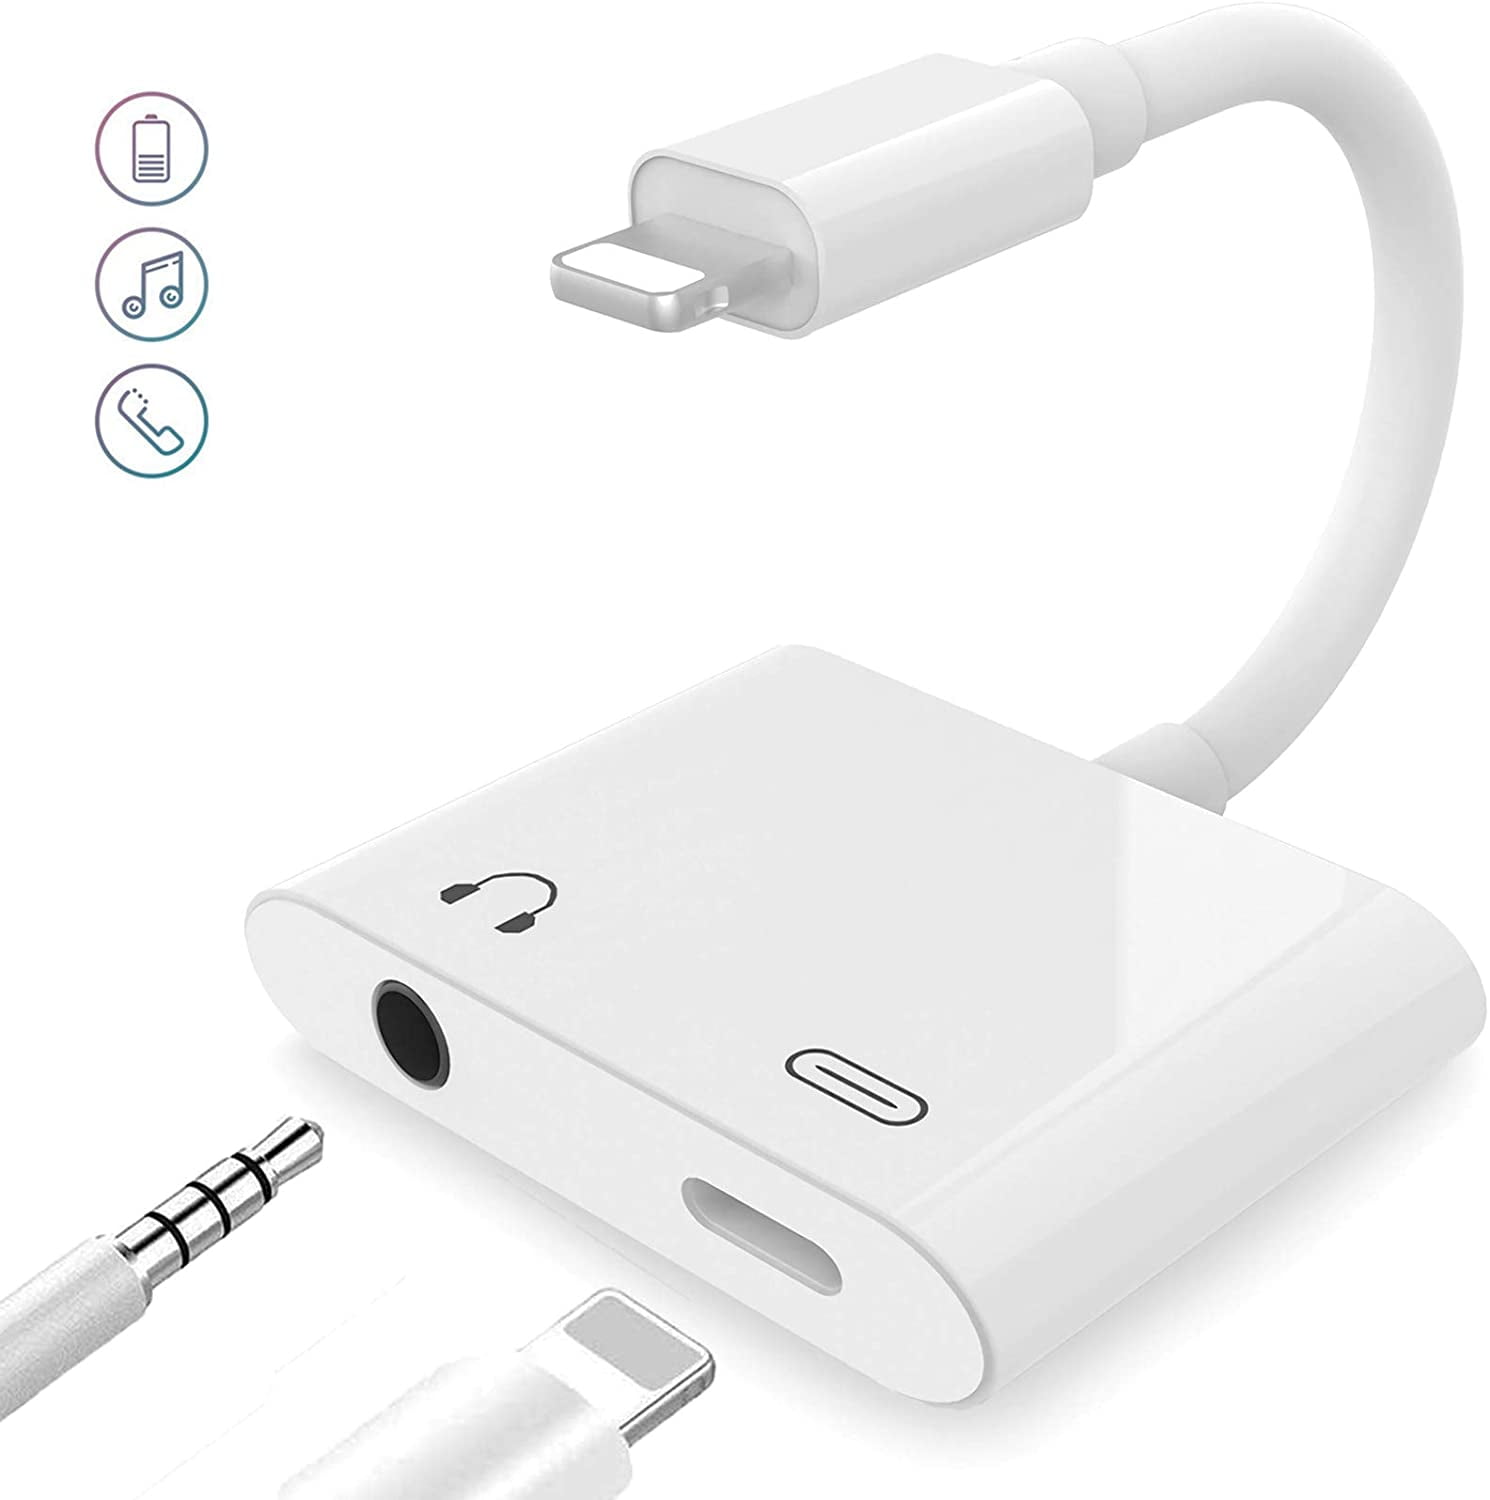 Headphones Adapter for iPhone 7 Adapter 3.5mm Jack Converter Audio Headphone and Charging Cable for iPhone 11 Pro/7/8Plus/X/Xs/XR Earphone Aux Adapter Music & Charge Splitter Supports All iOS Black 